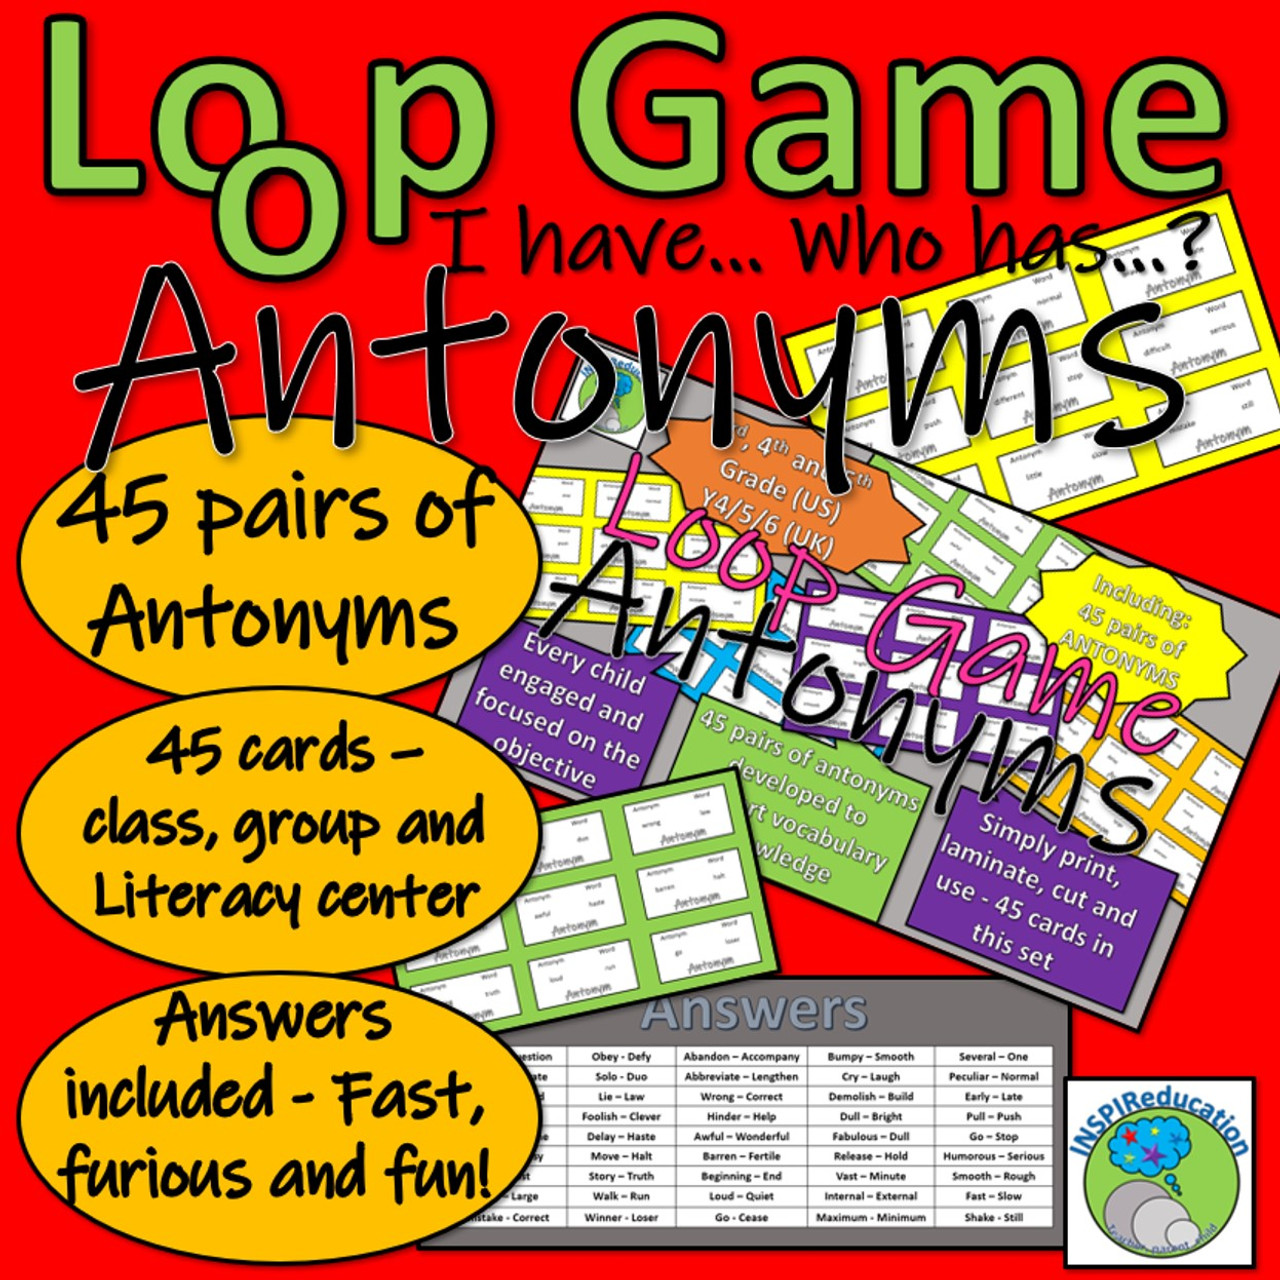 Antonyms (opposite meaning) Loop Game - "I have... Who has...?" 45 Pairs of words